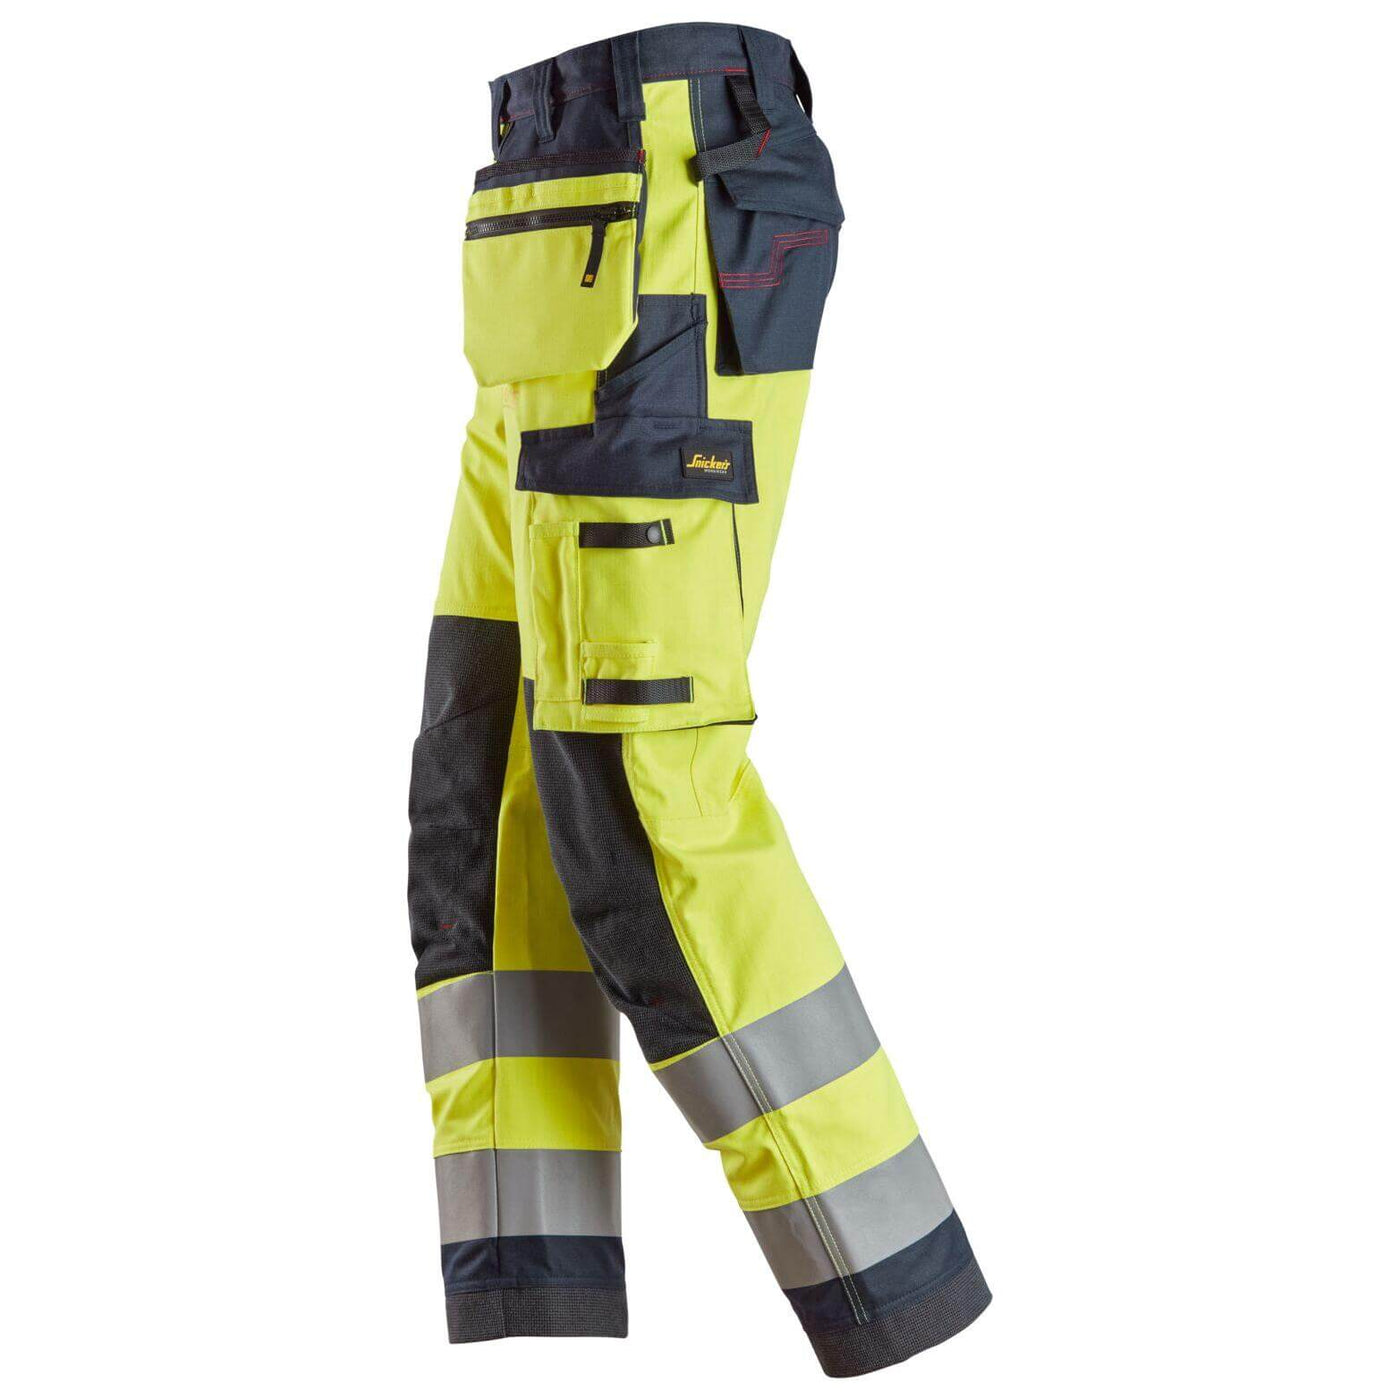 Snickers 6261 ProtecWork Hi Vis Work Trousers with Holster Pockets and Equal Leg Pockets Class 2 Hi Vis Yellow Navy Blue left3710007 #colour_hi-vis-yellow-navy-blue